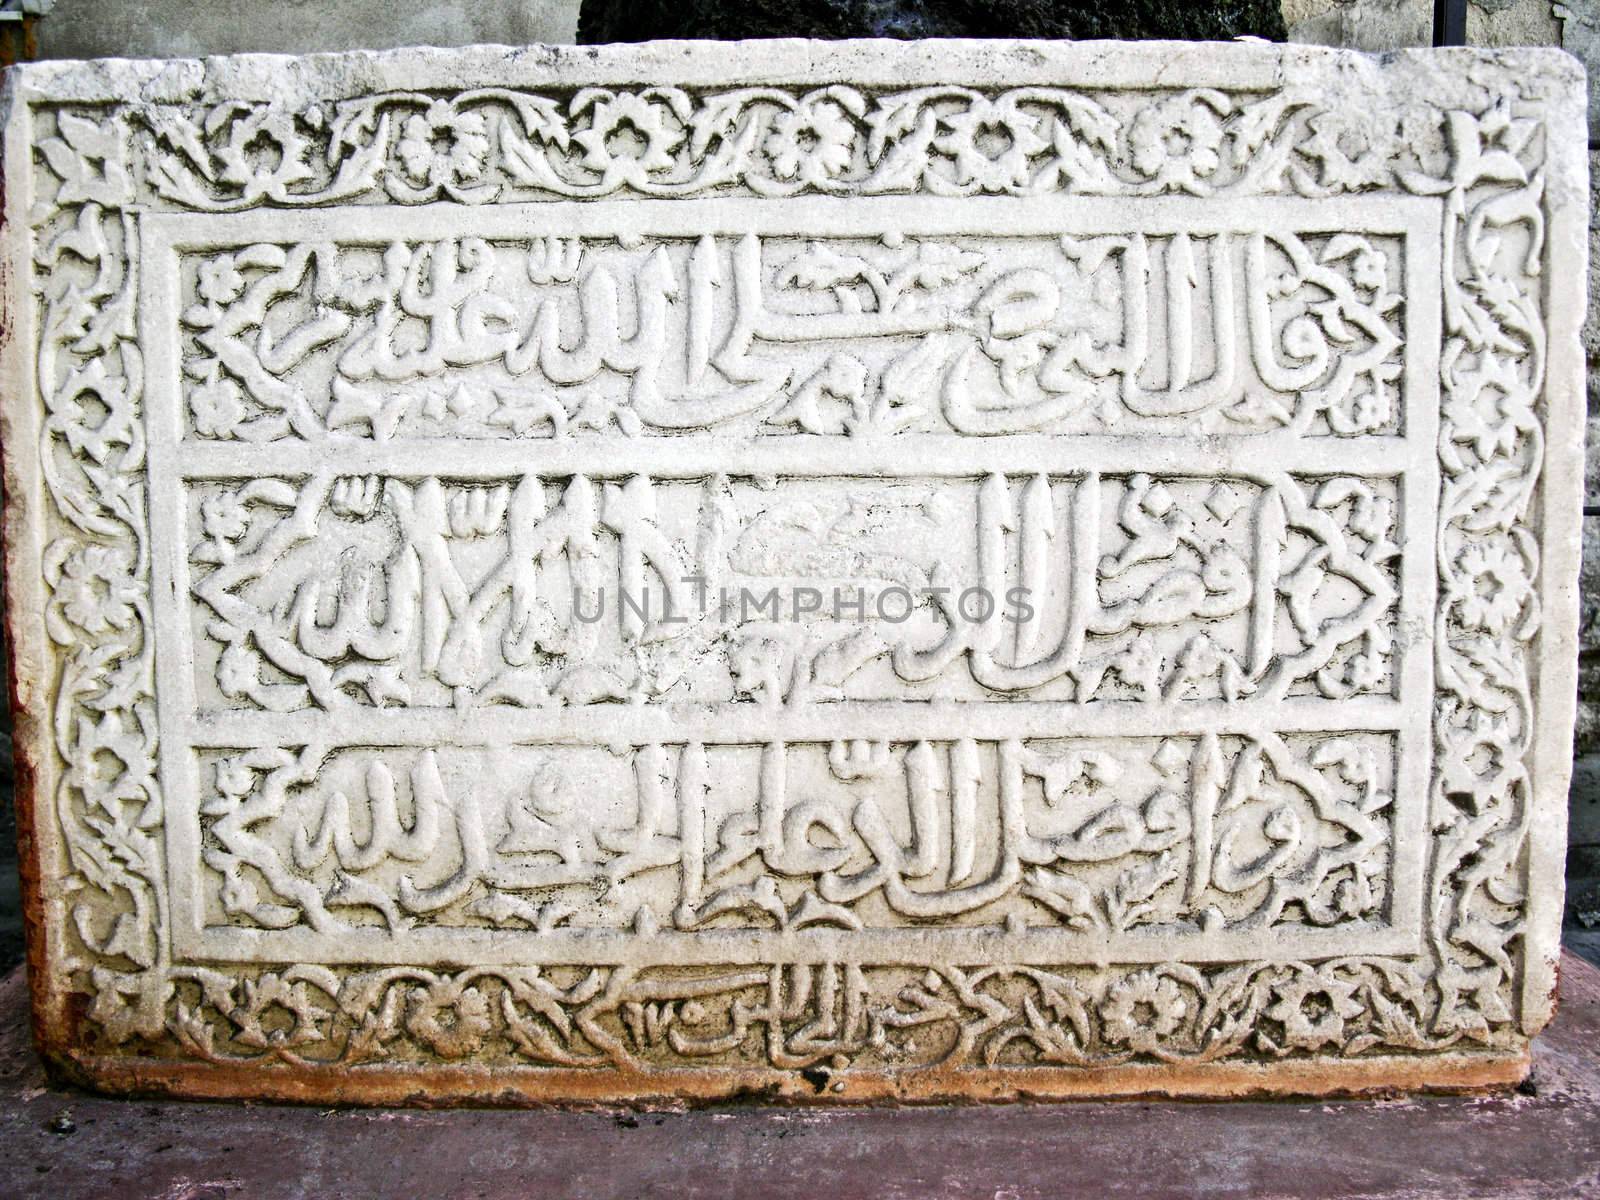 Marble slab with a quote from the Koran, 1562-1563, Theodosia